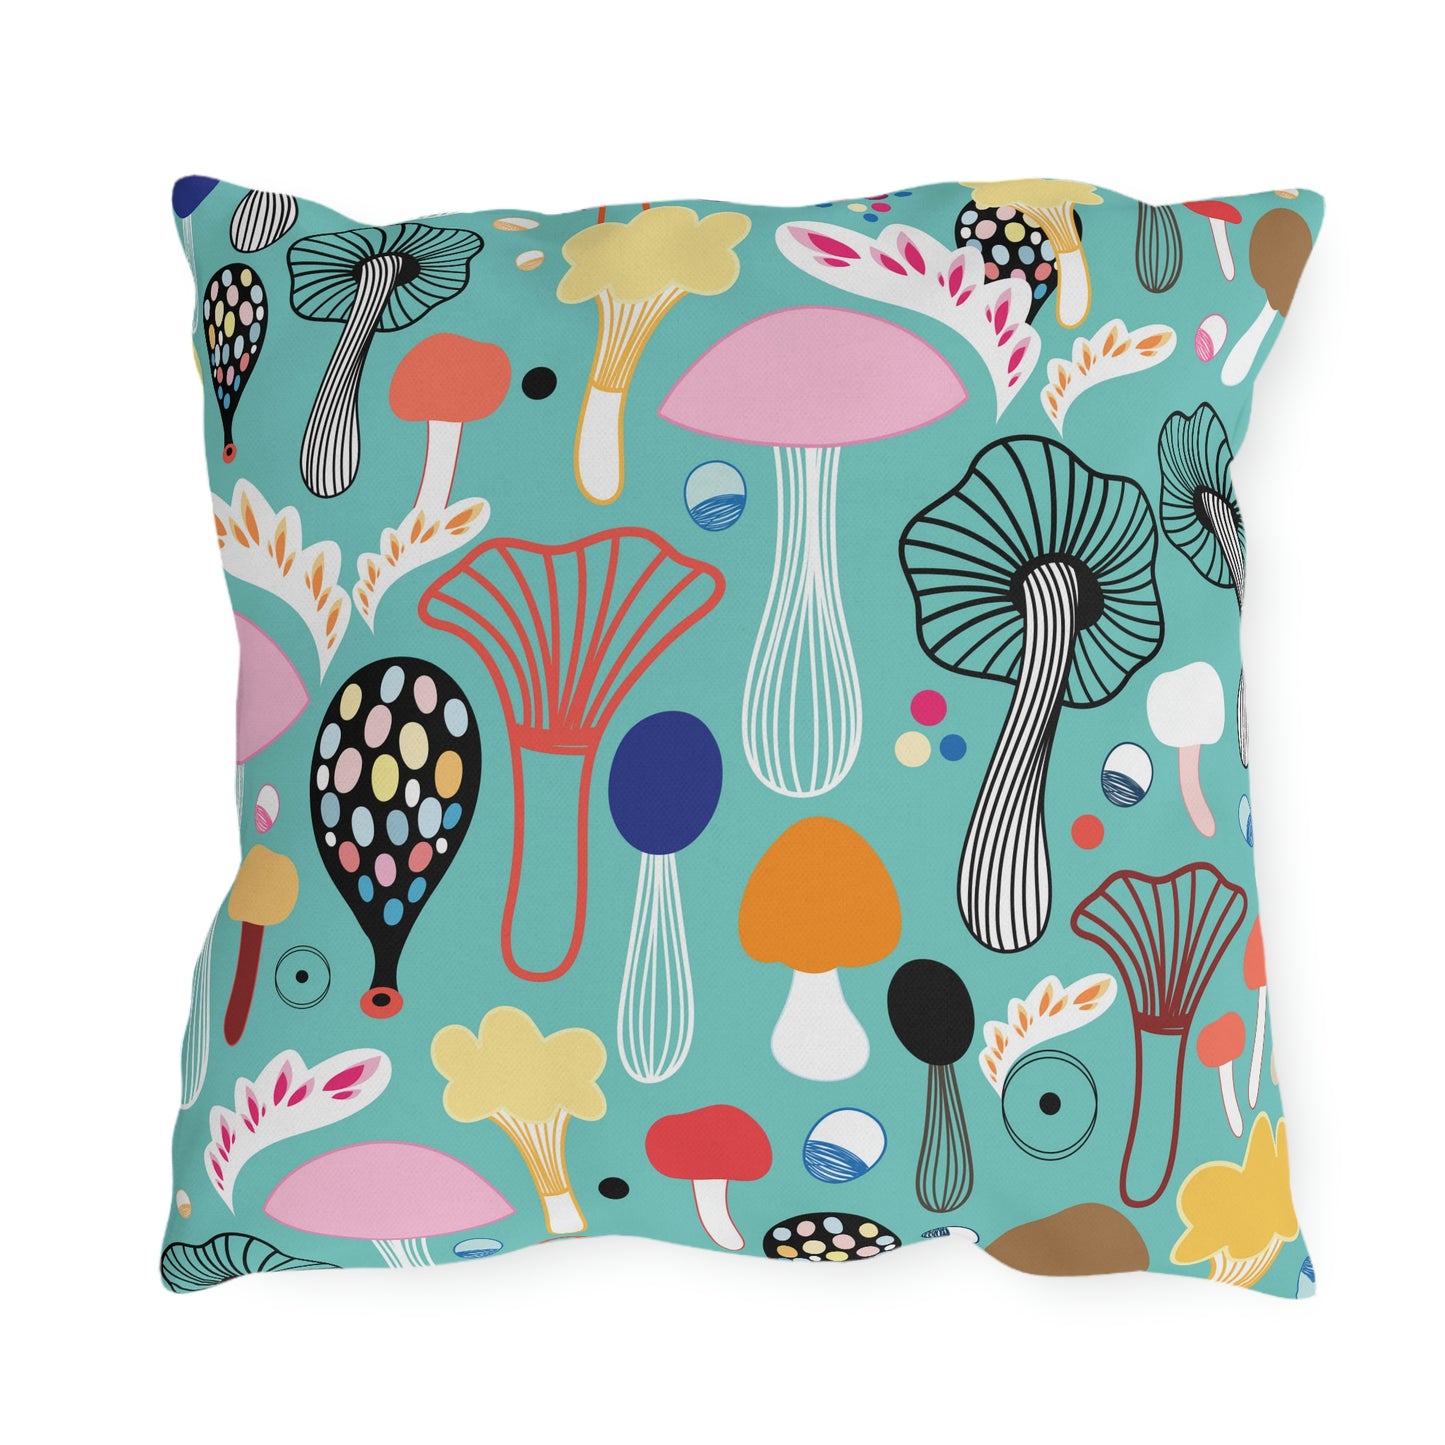 Colorful Mushrooms Outdoor Pillow